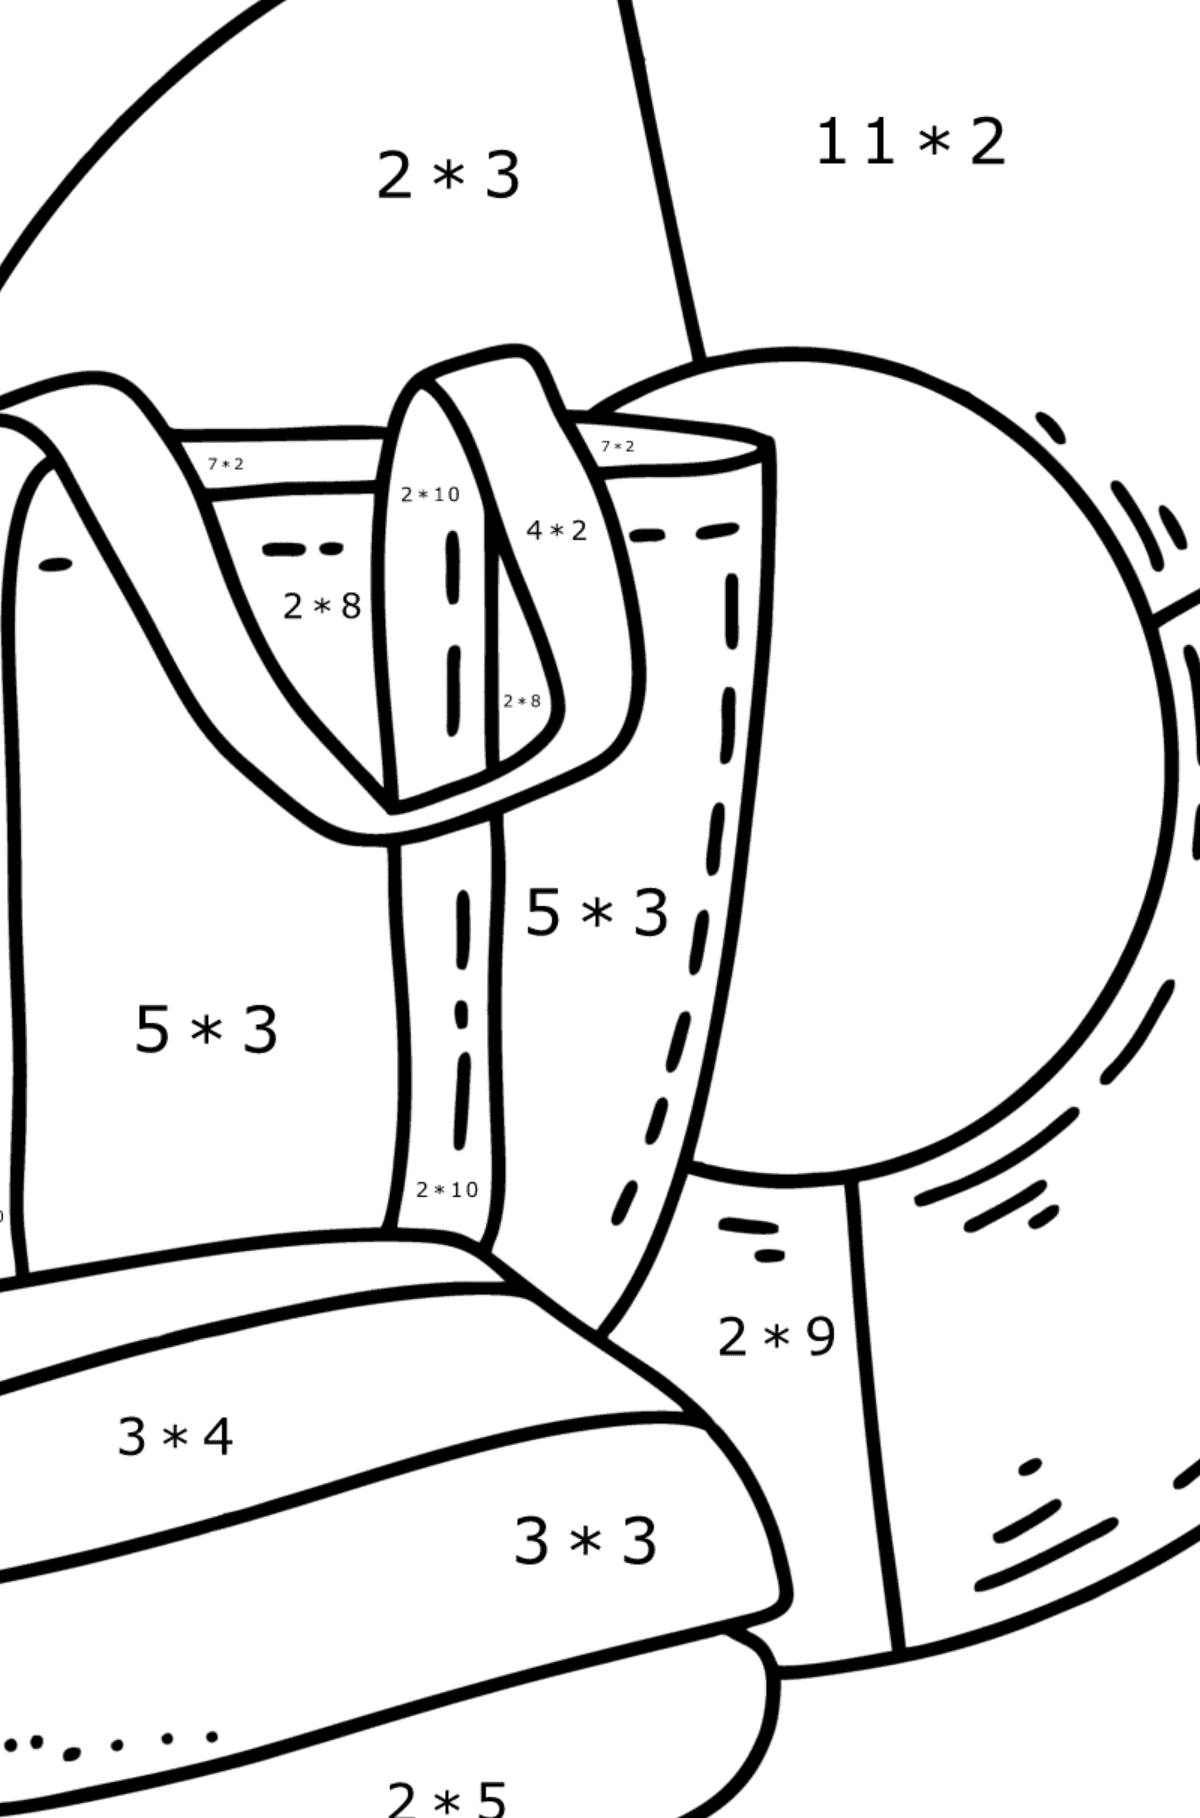 Coloring page Beach: bag and lifebuoy - Math Coloring - Multiplication for Kids